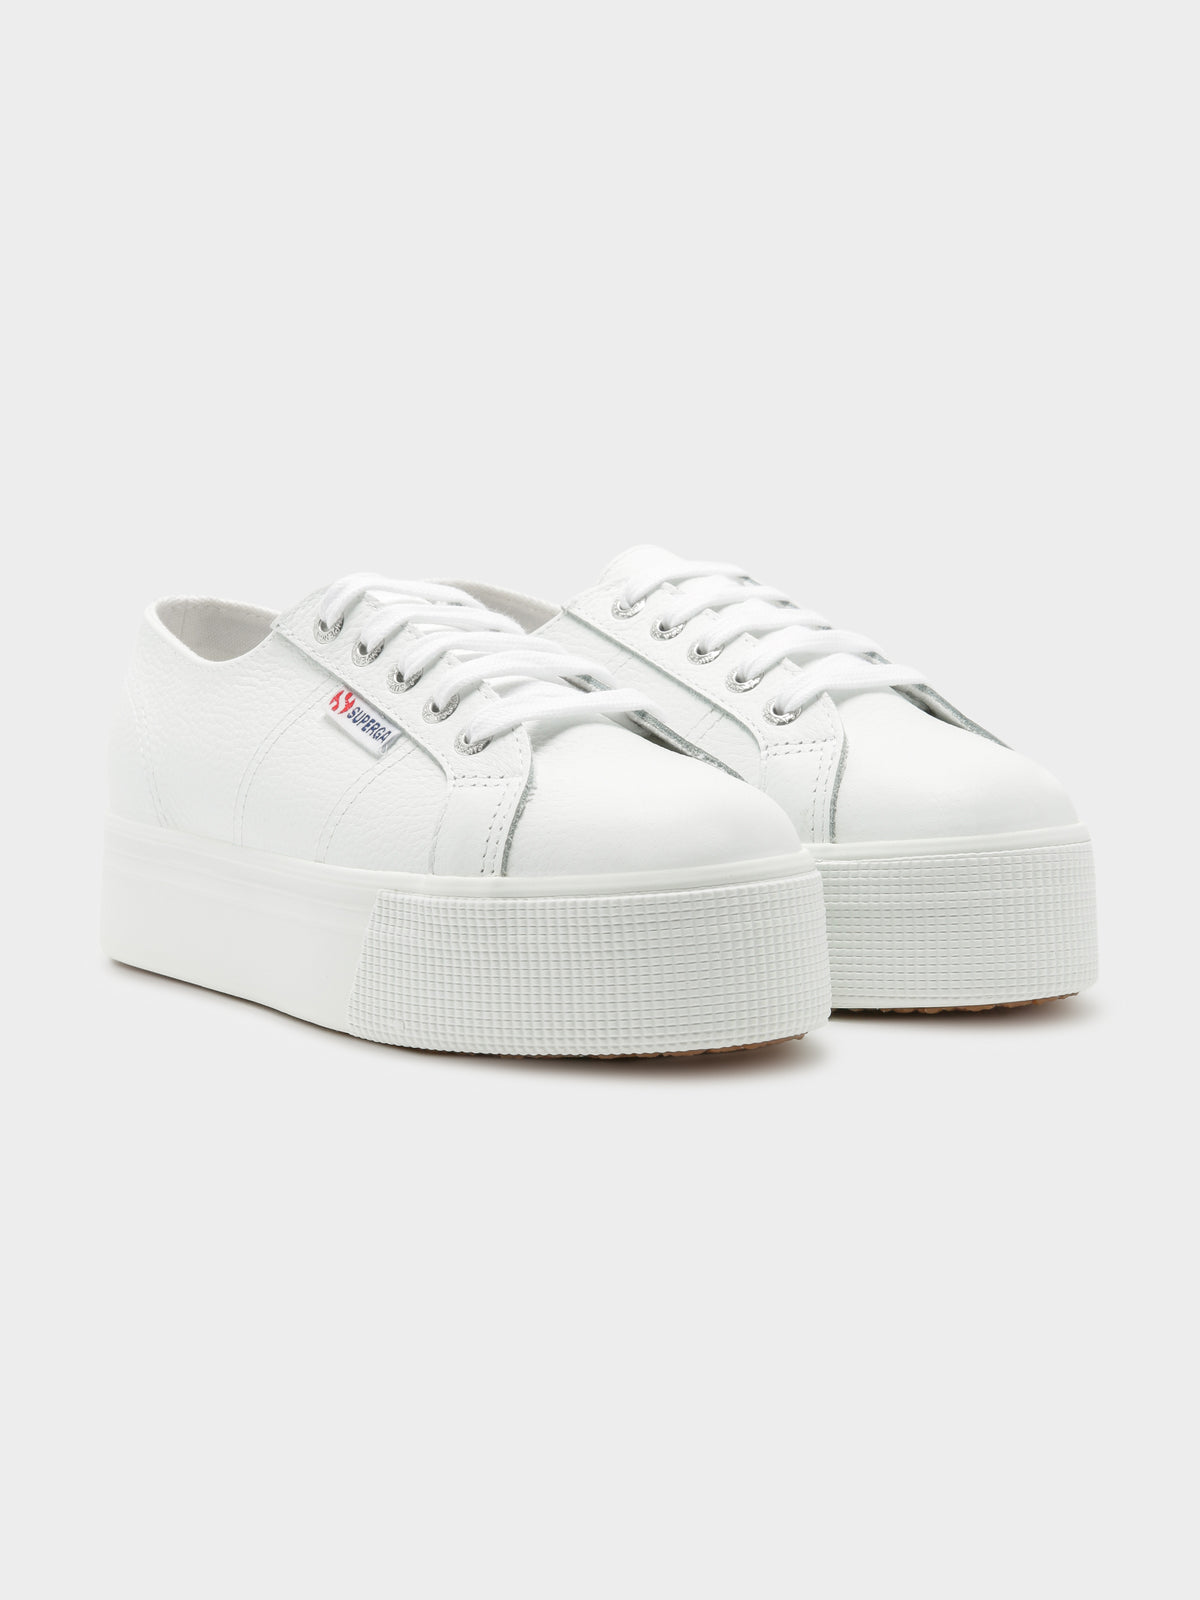 Womens 2790 FGLW Platform Sneakers in White Leather